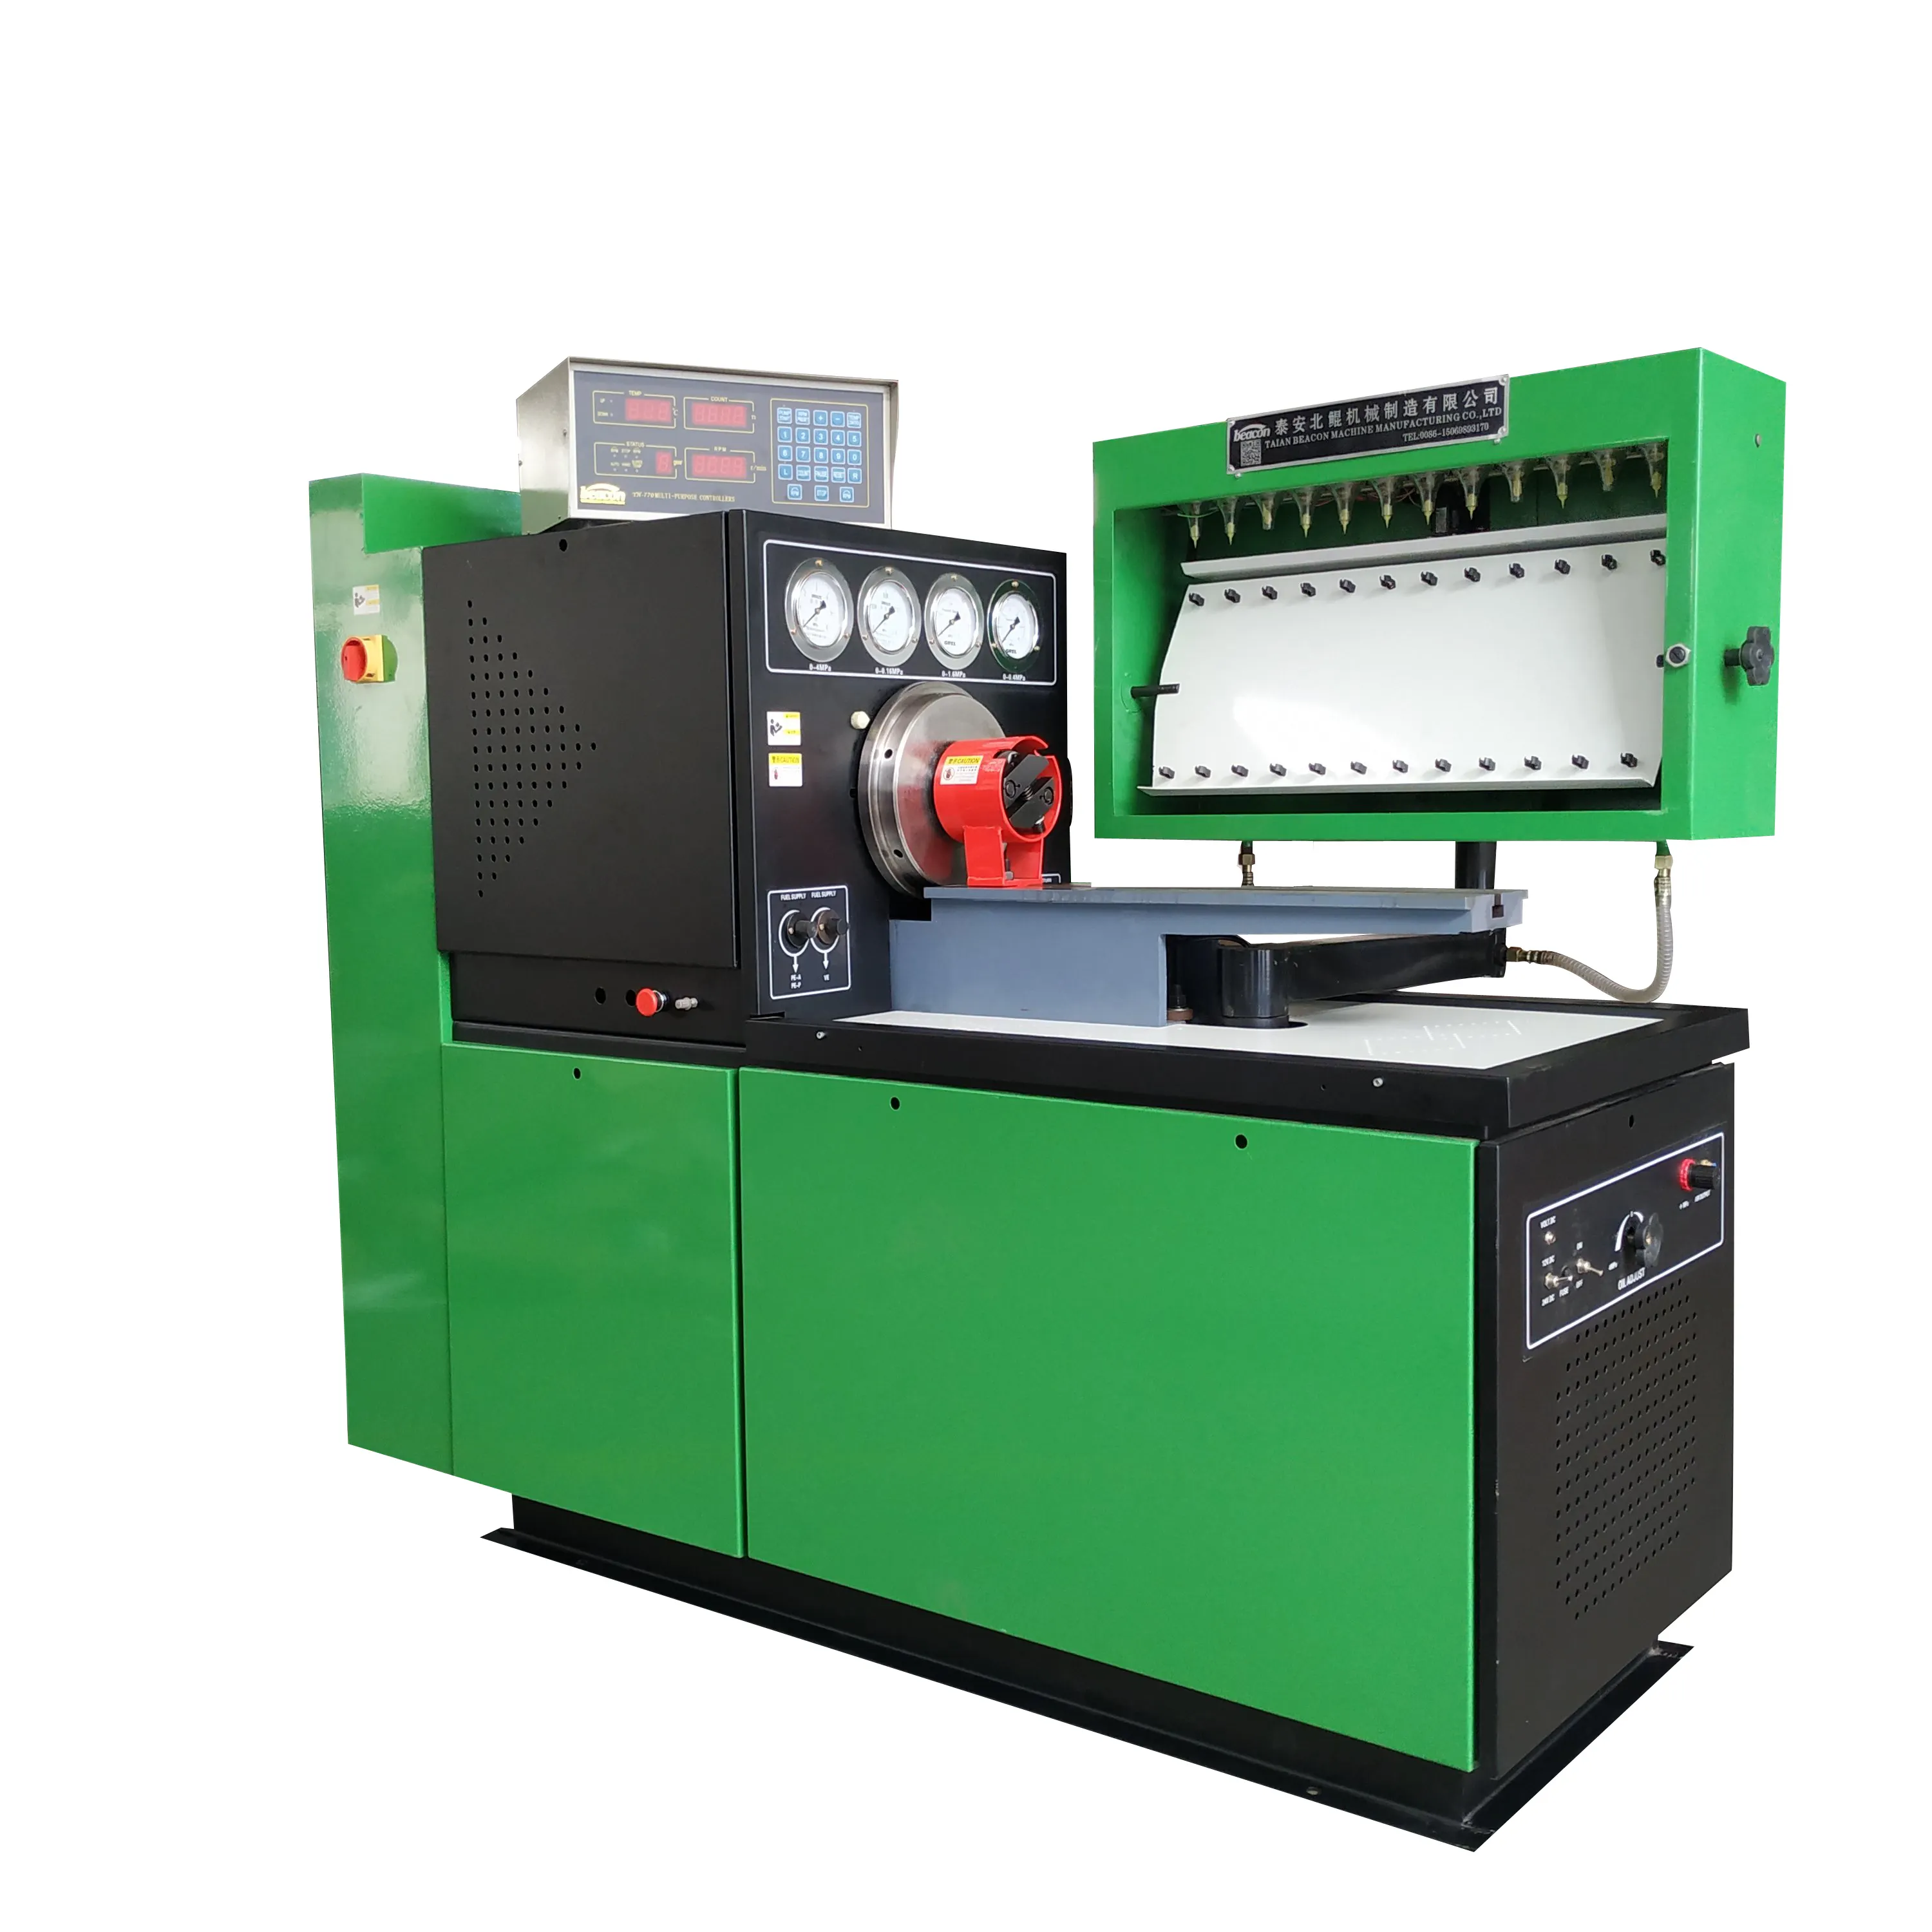 Mechanical Testing Equipment Testing New & Used Diesel Injectors & Pumps 12psb diesel fuel injection pump test bench